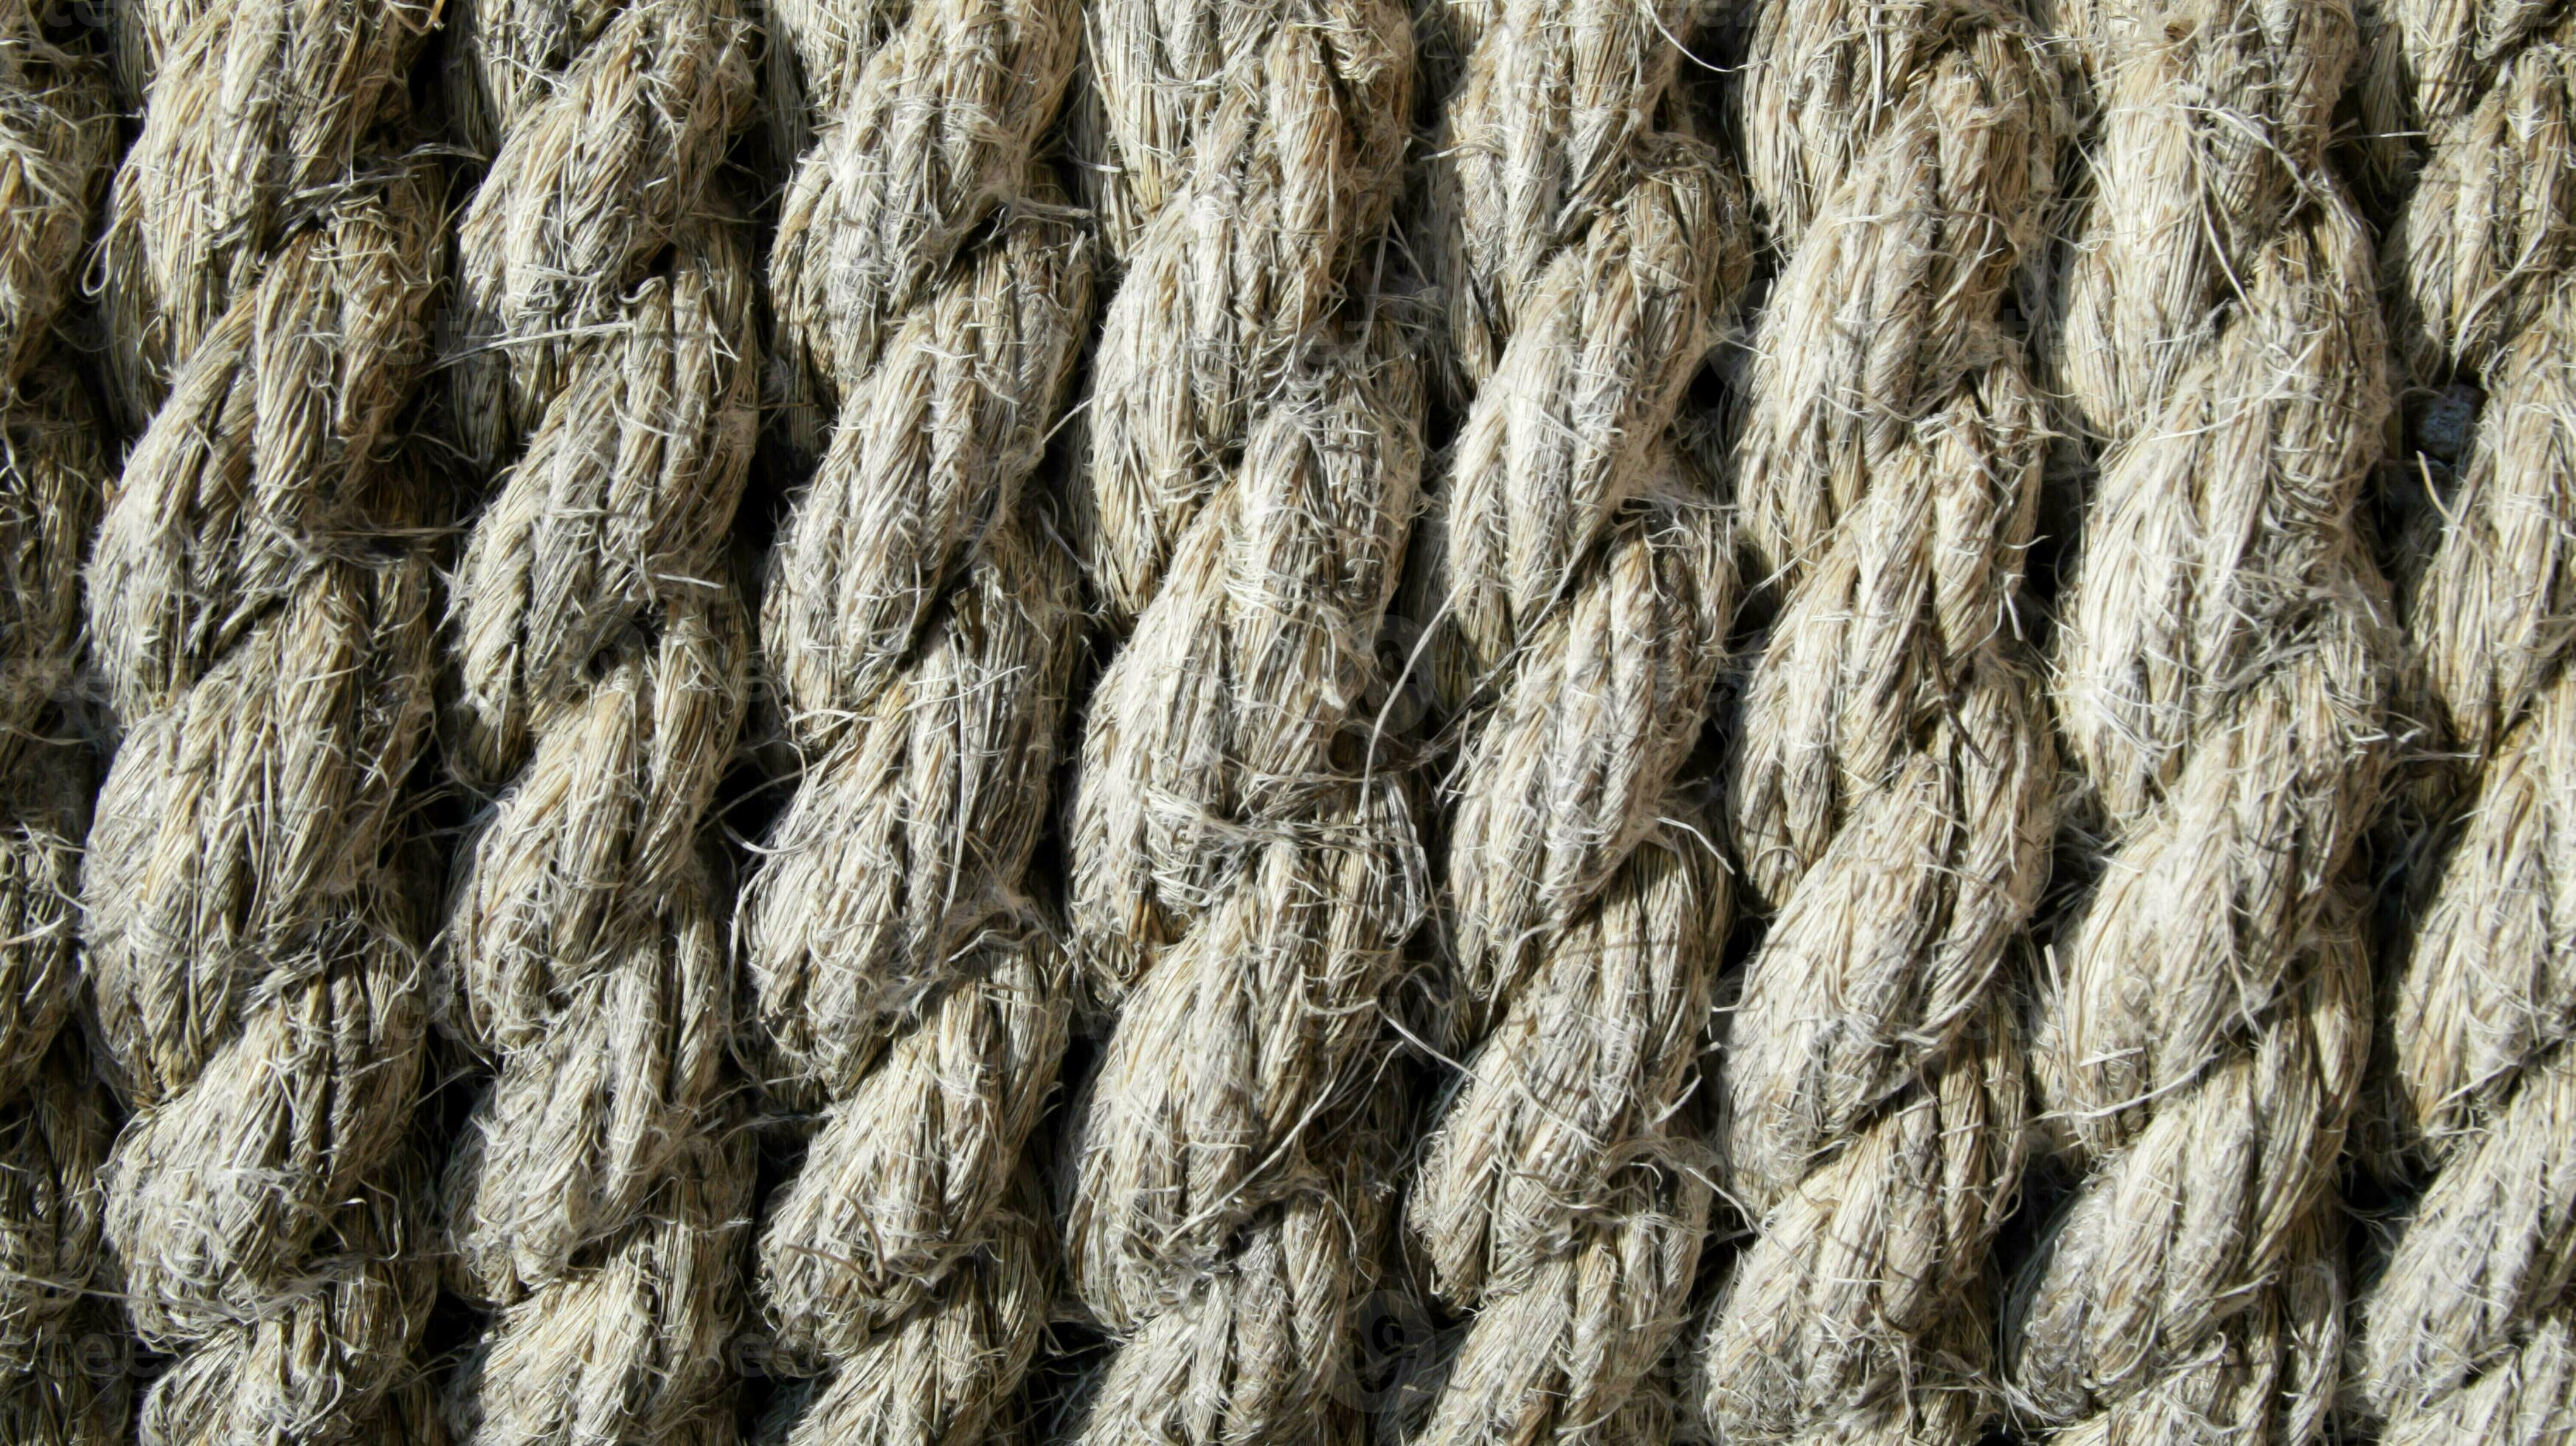 Close up image of twisted natural fiber rope or hemp rope texture